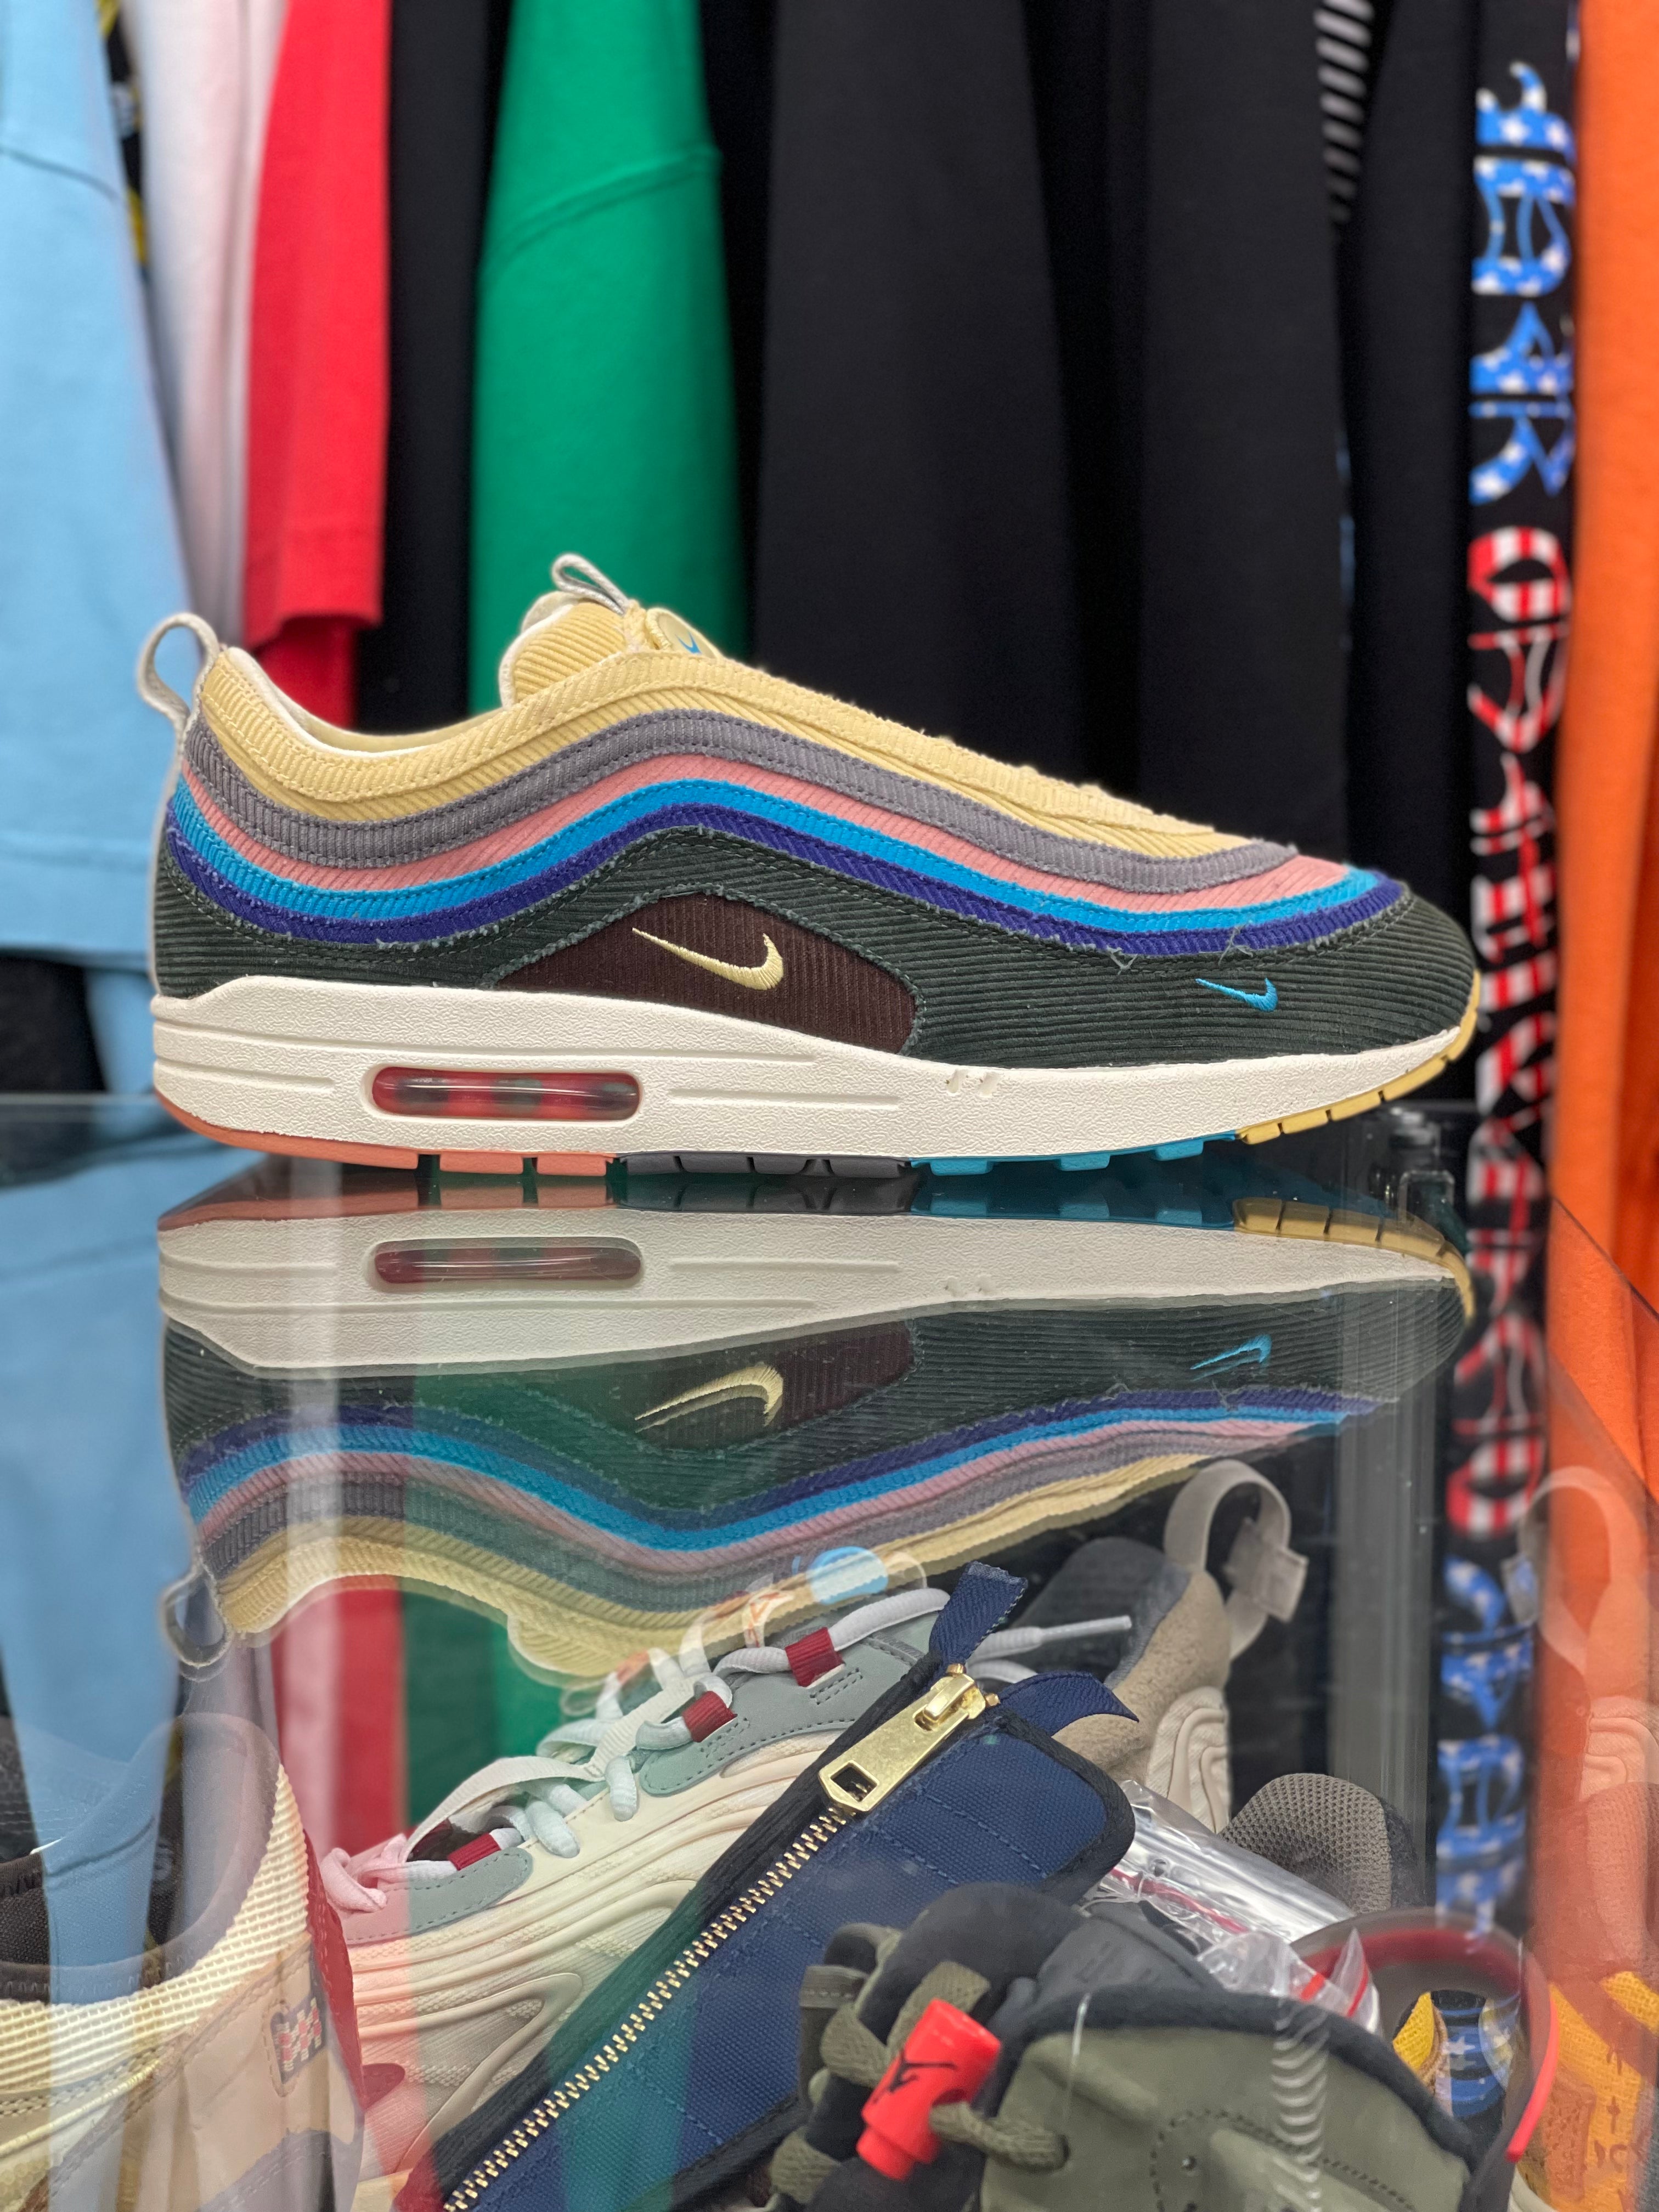 Air Max 97/1 “Sean Wotherspoon”